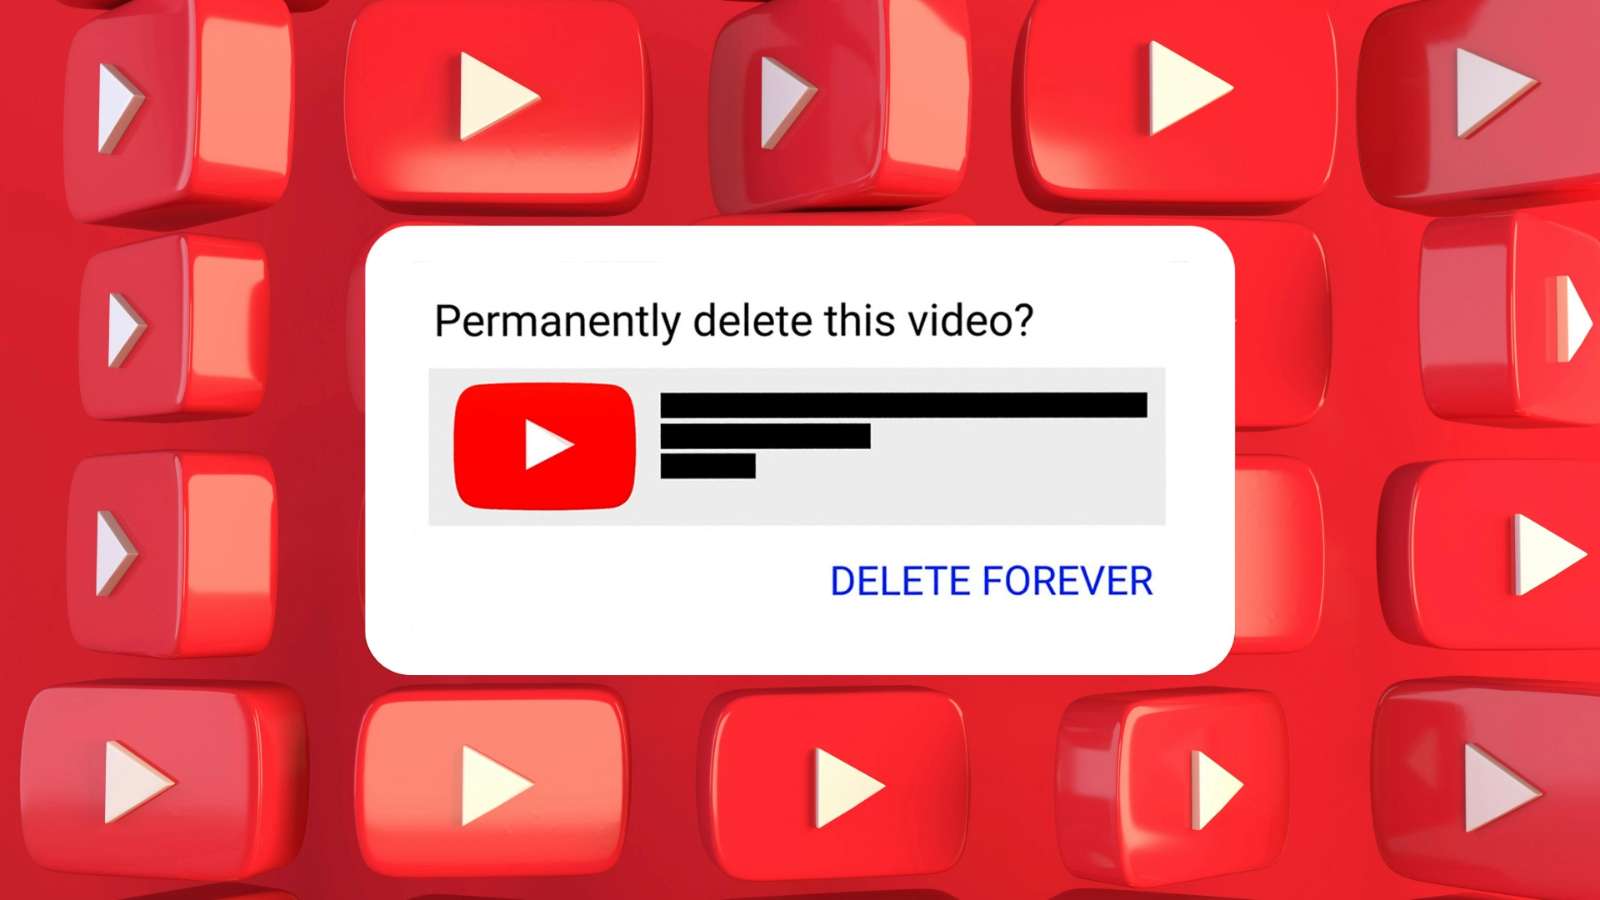 YouTube logos in the background with a pop-up in the center showing the option to permanently delete a video.